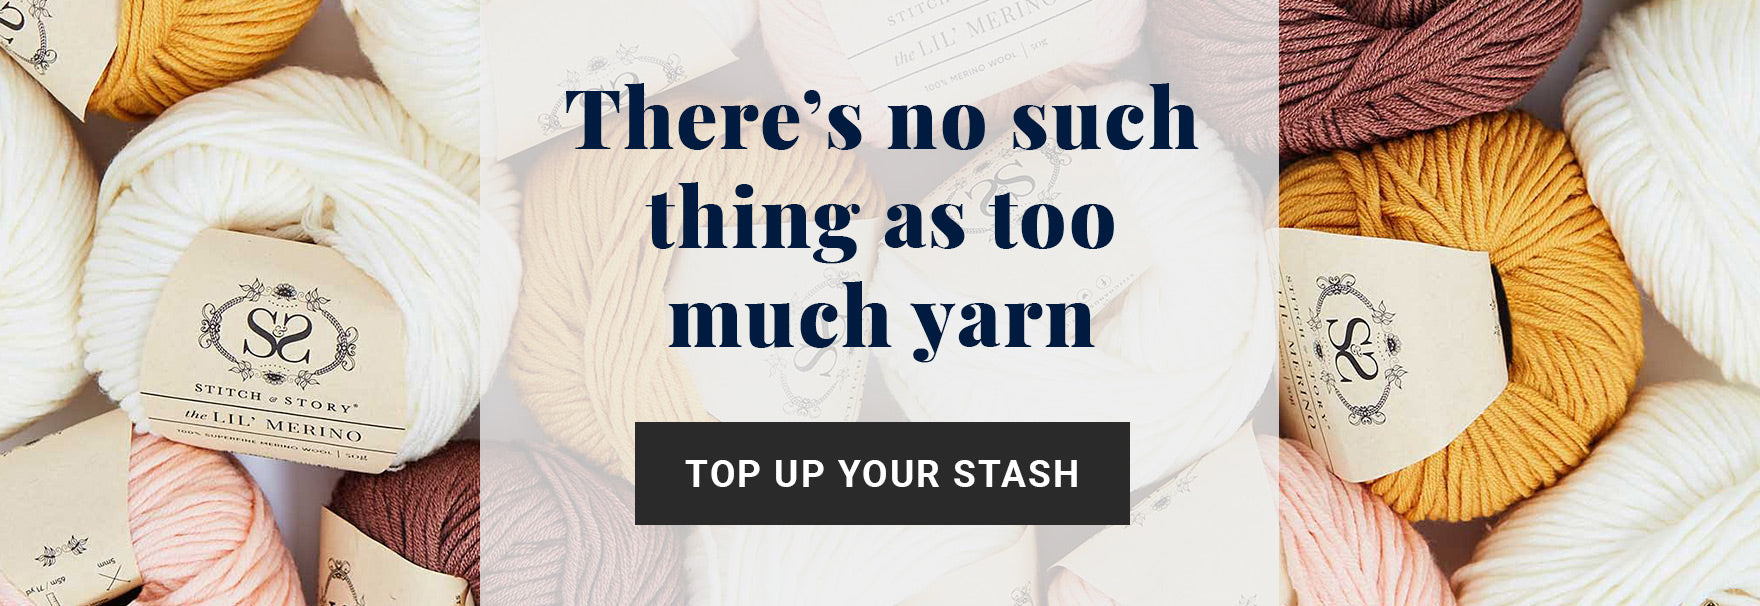 Shop for knitting and crochet yarns at Stitch & Story